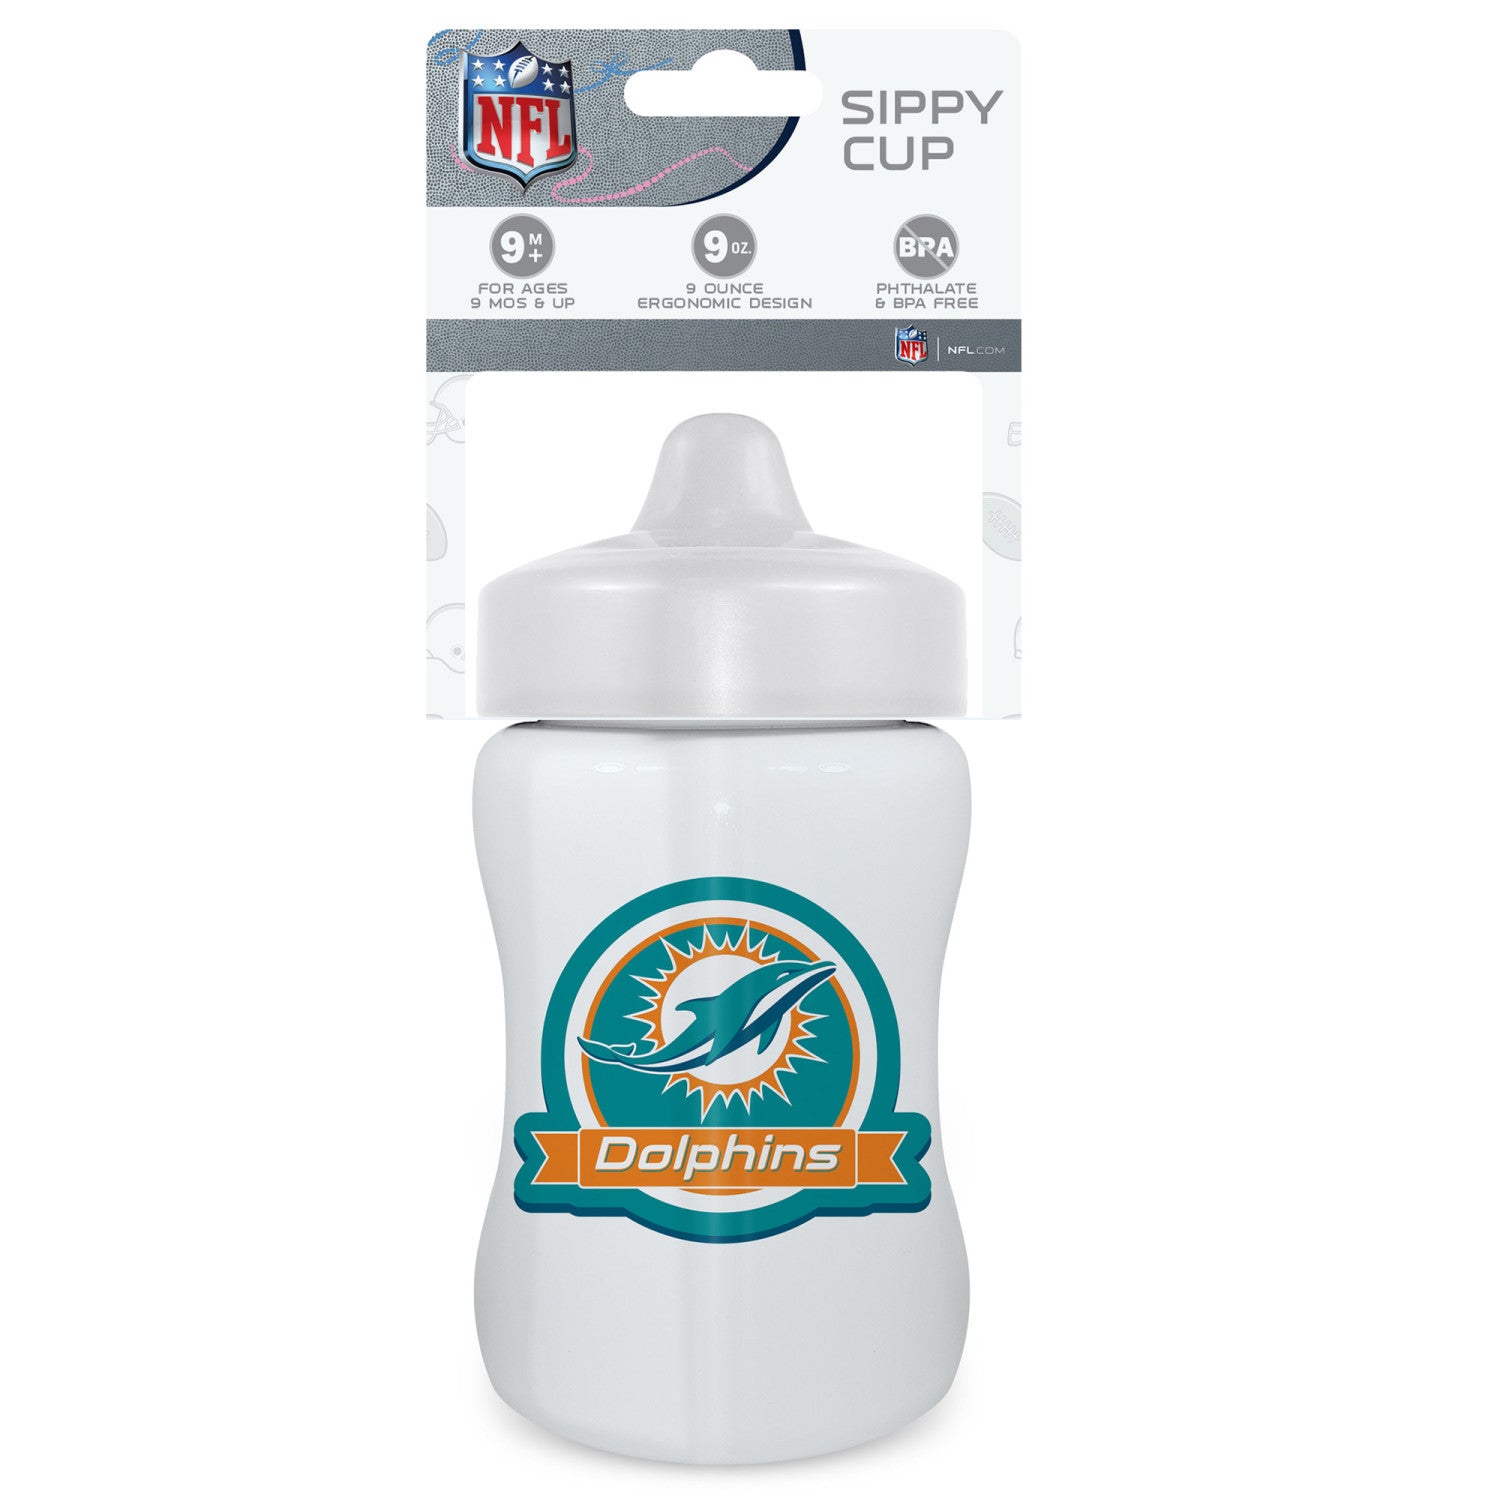 Miami Dolphins NFL Sippy Cup